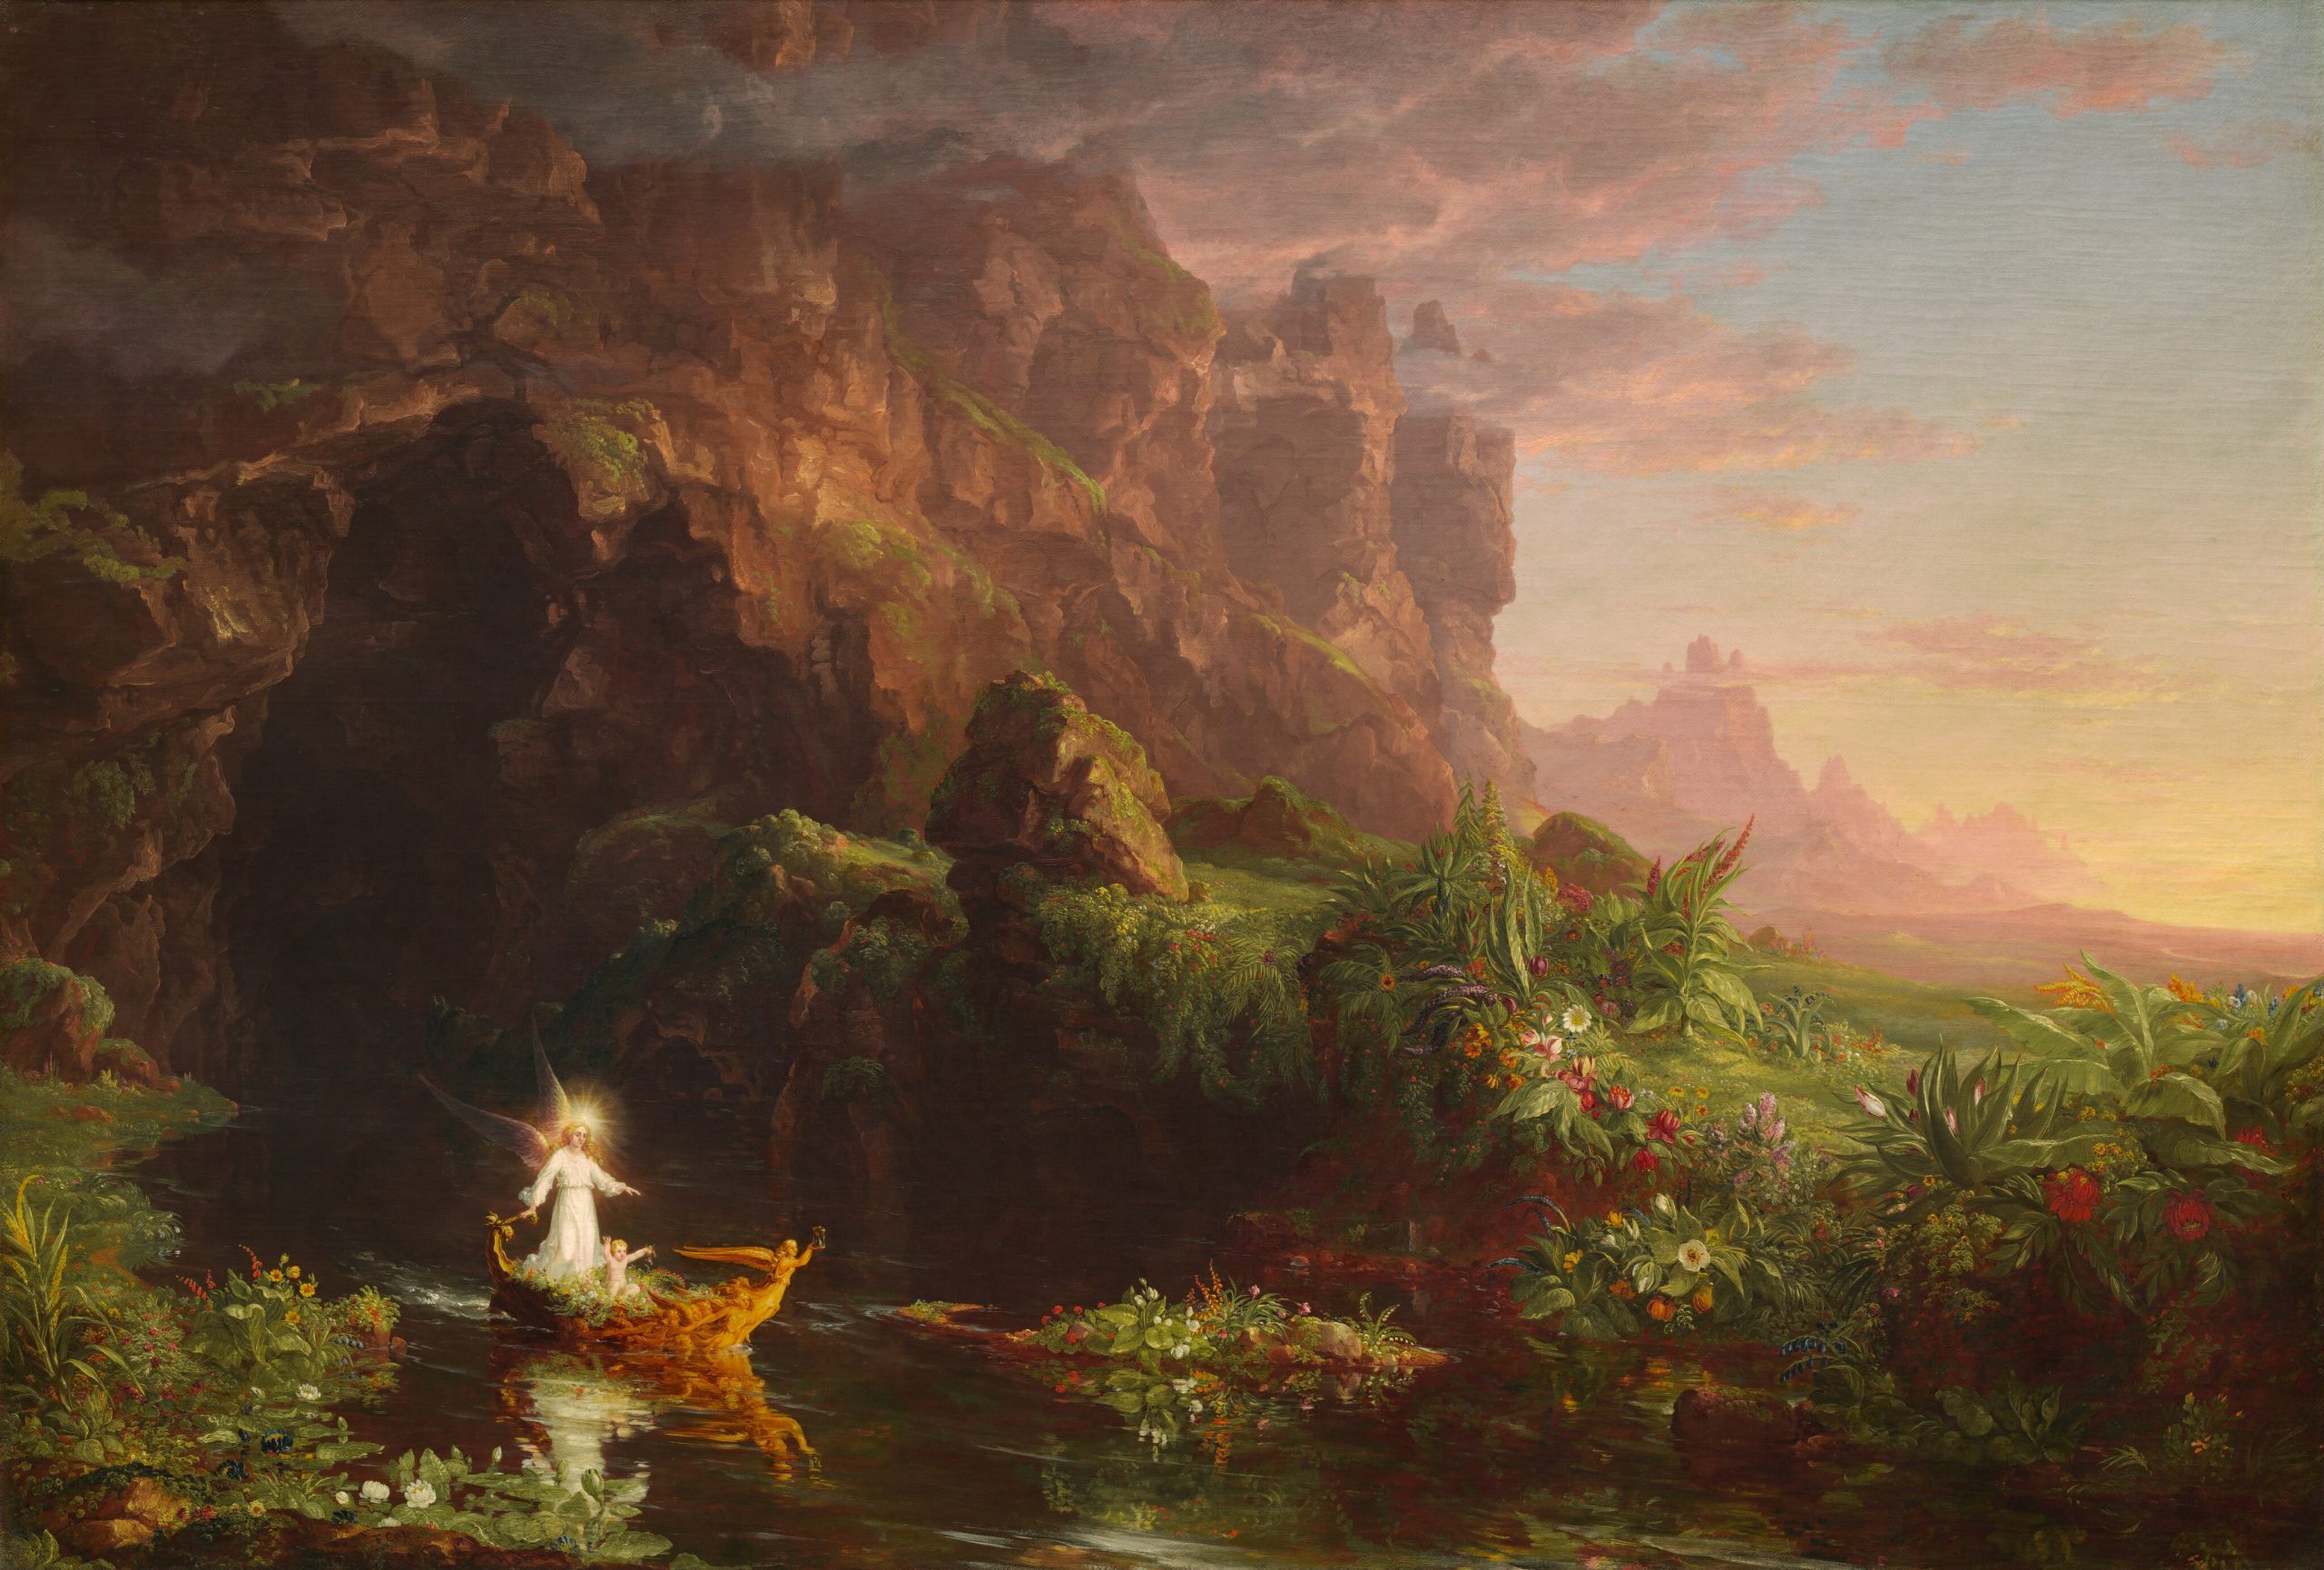 A boat floats through a serene body of water surrounded by mountains and flowers.